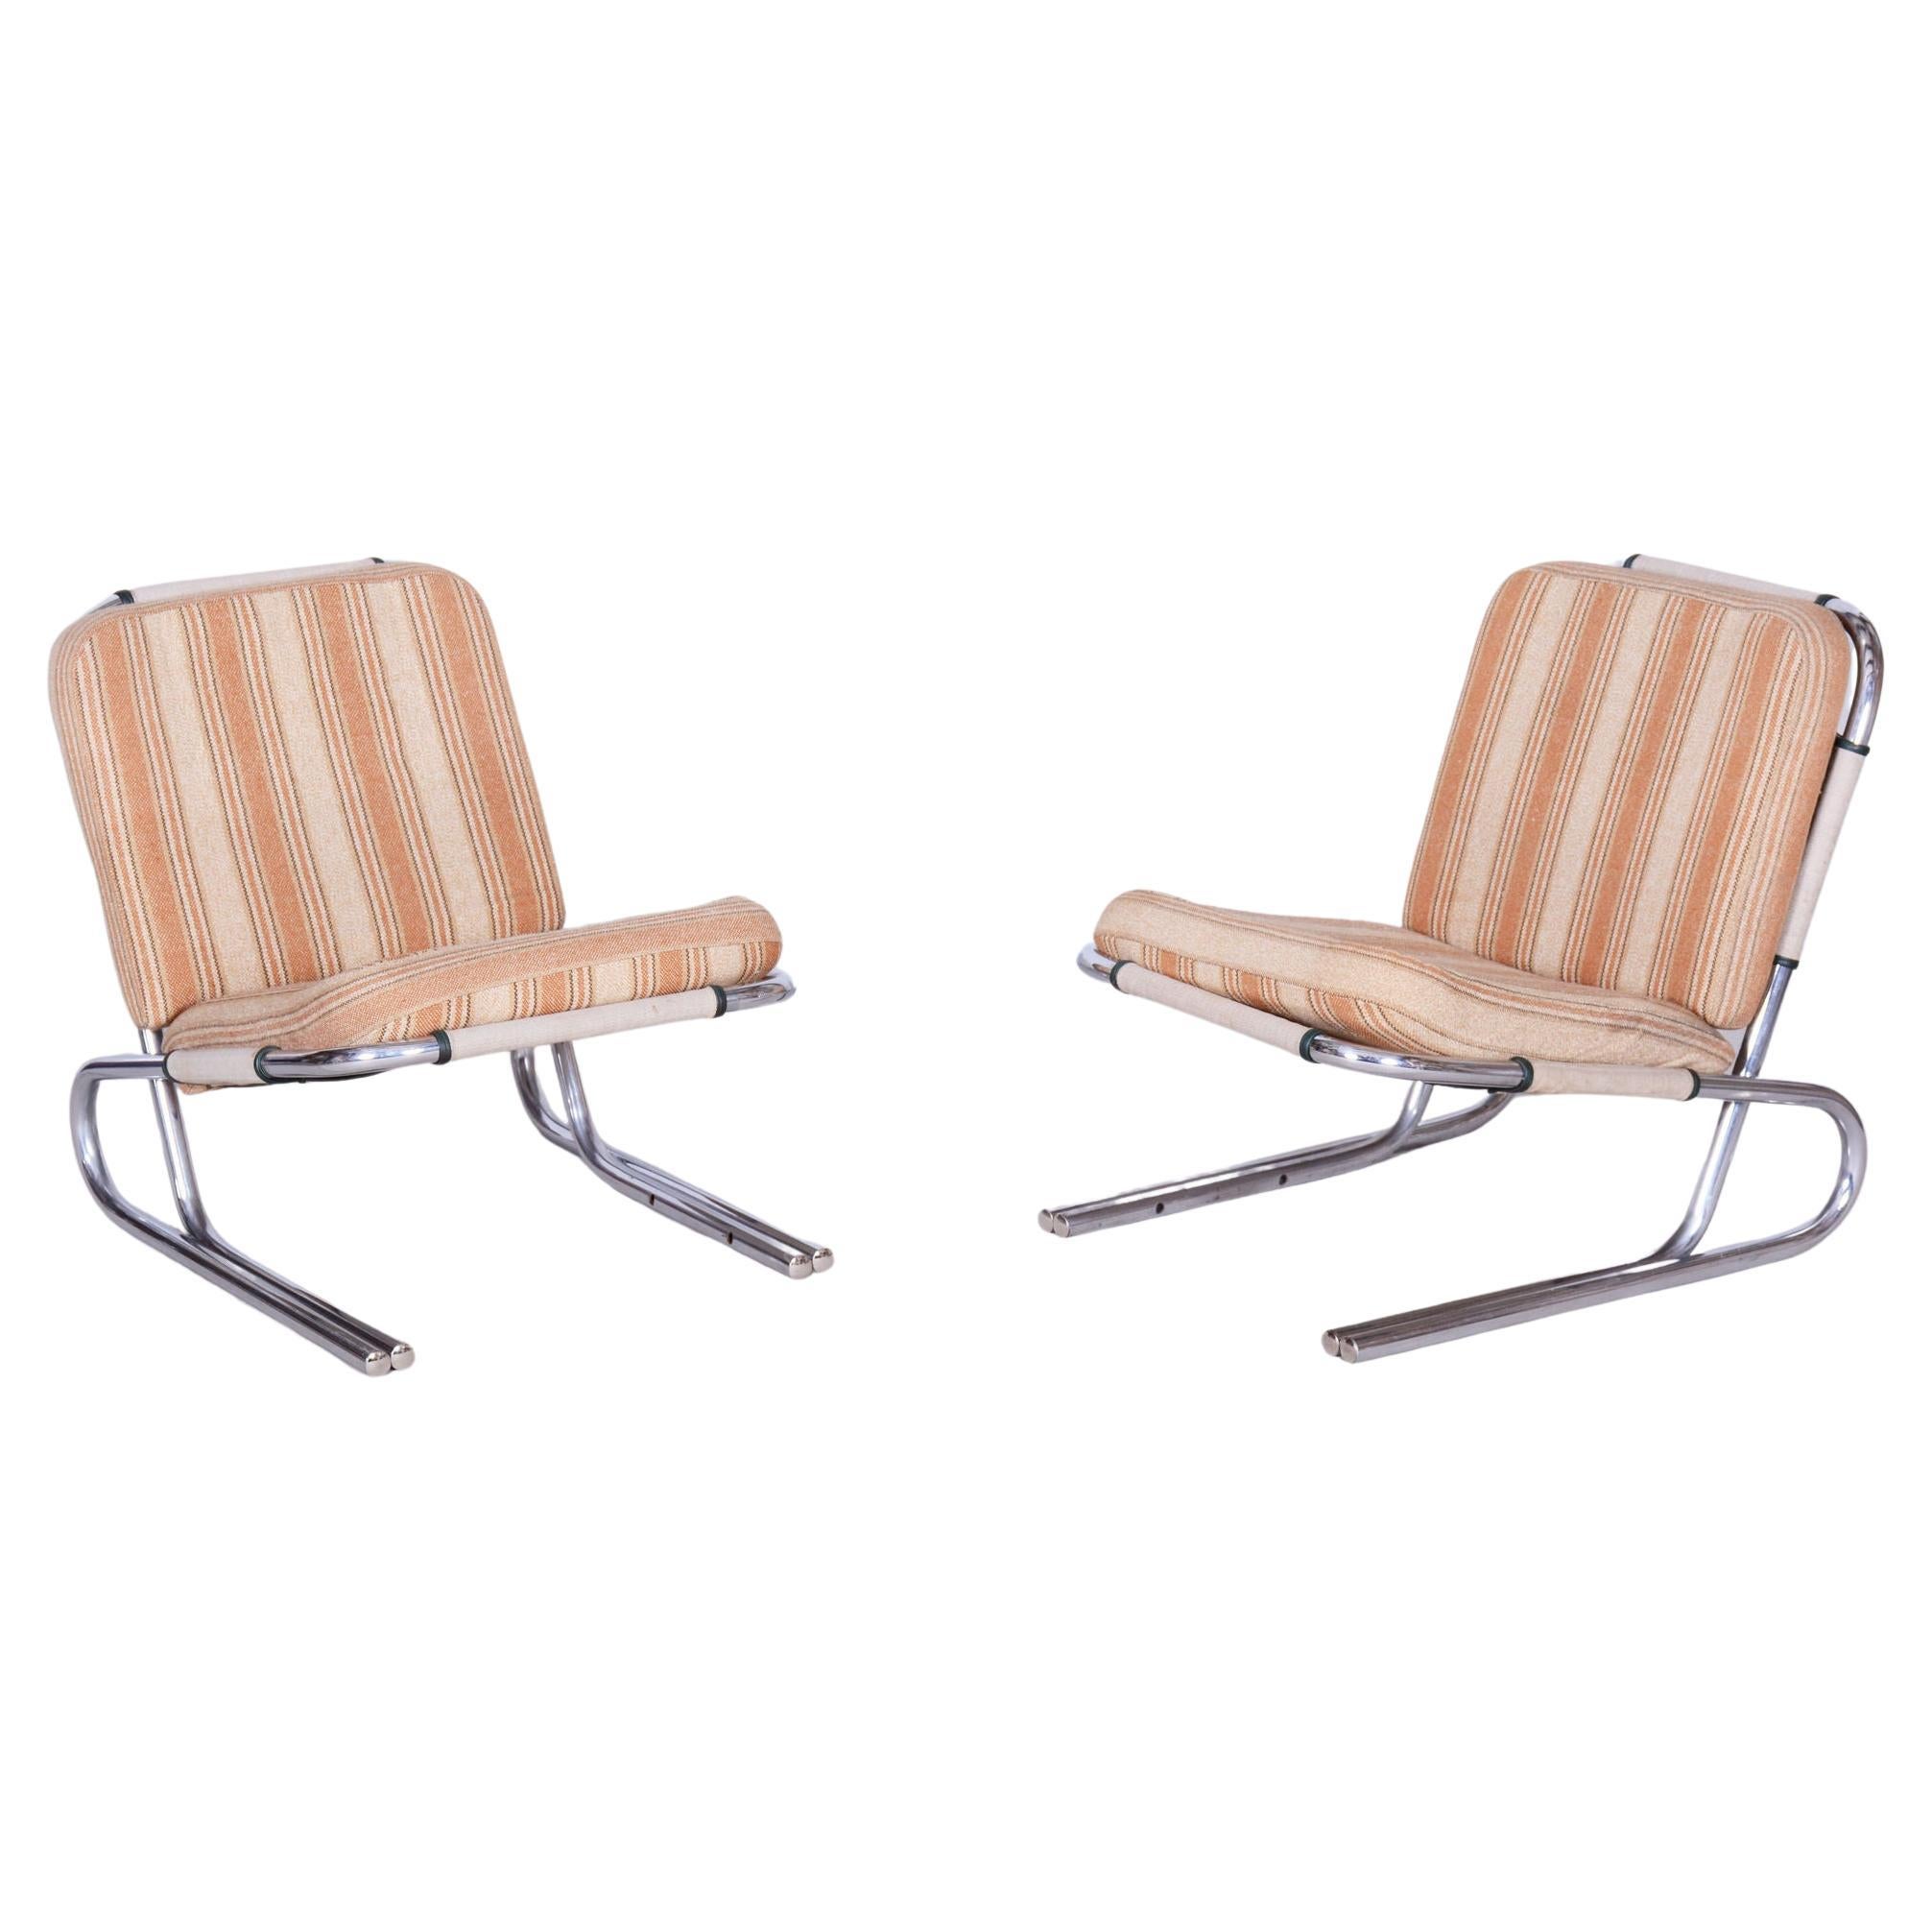 Set of Two Original Bauhaus Armchairs, Chrome-Plated Steel, Germany, 1940s For Sale